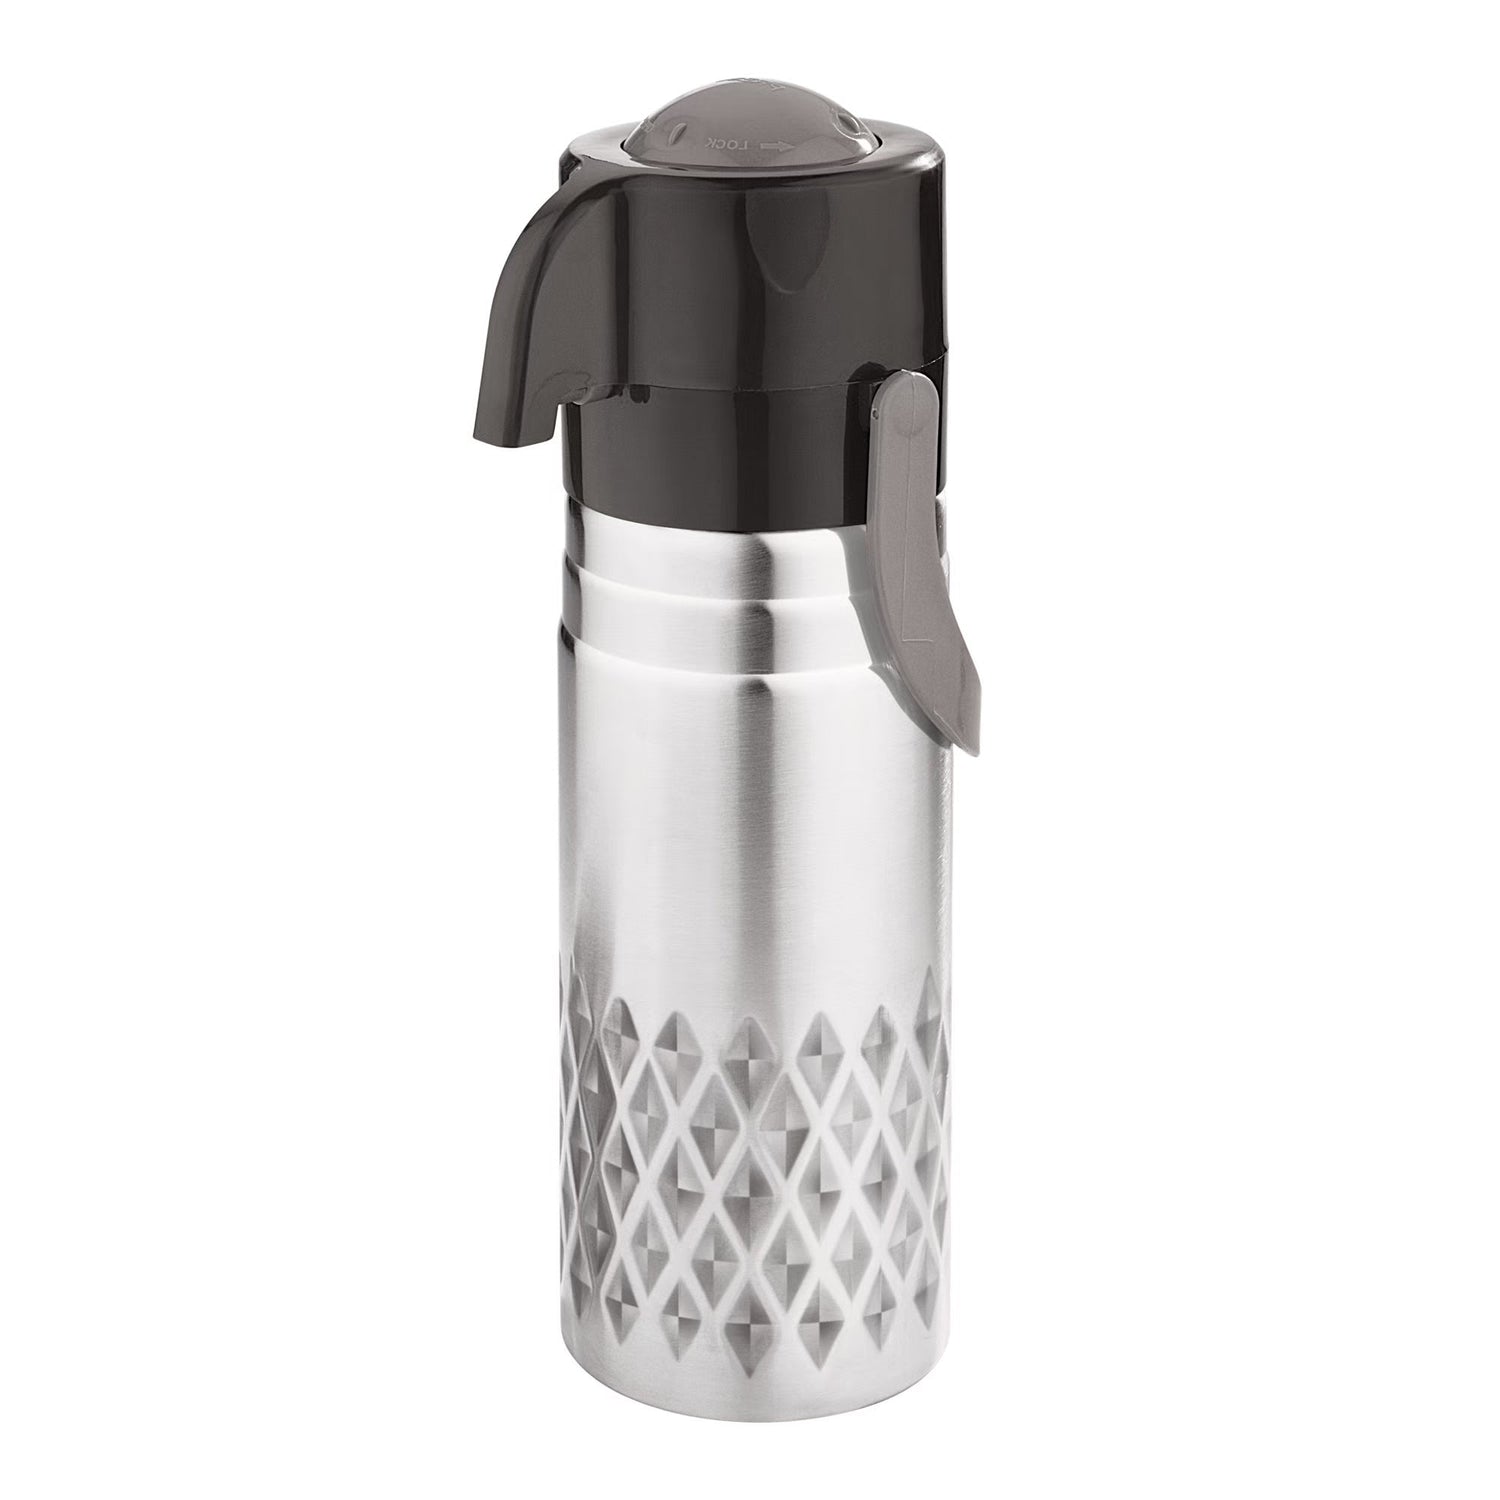 Pipal Jharna Stainless Steel Airpot